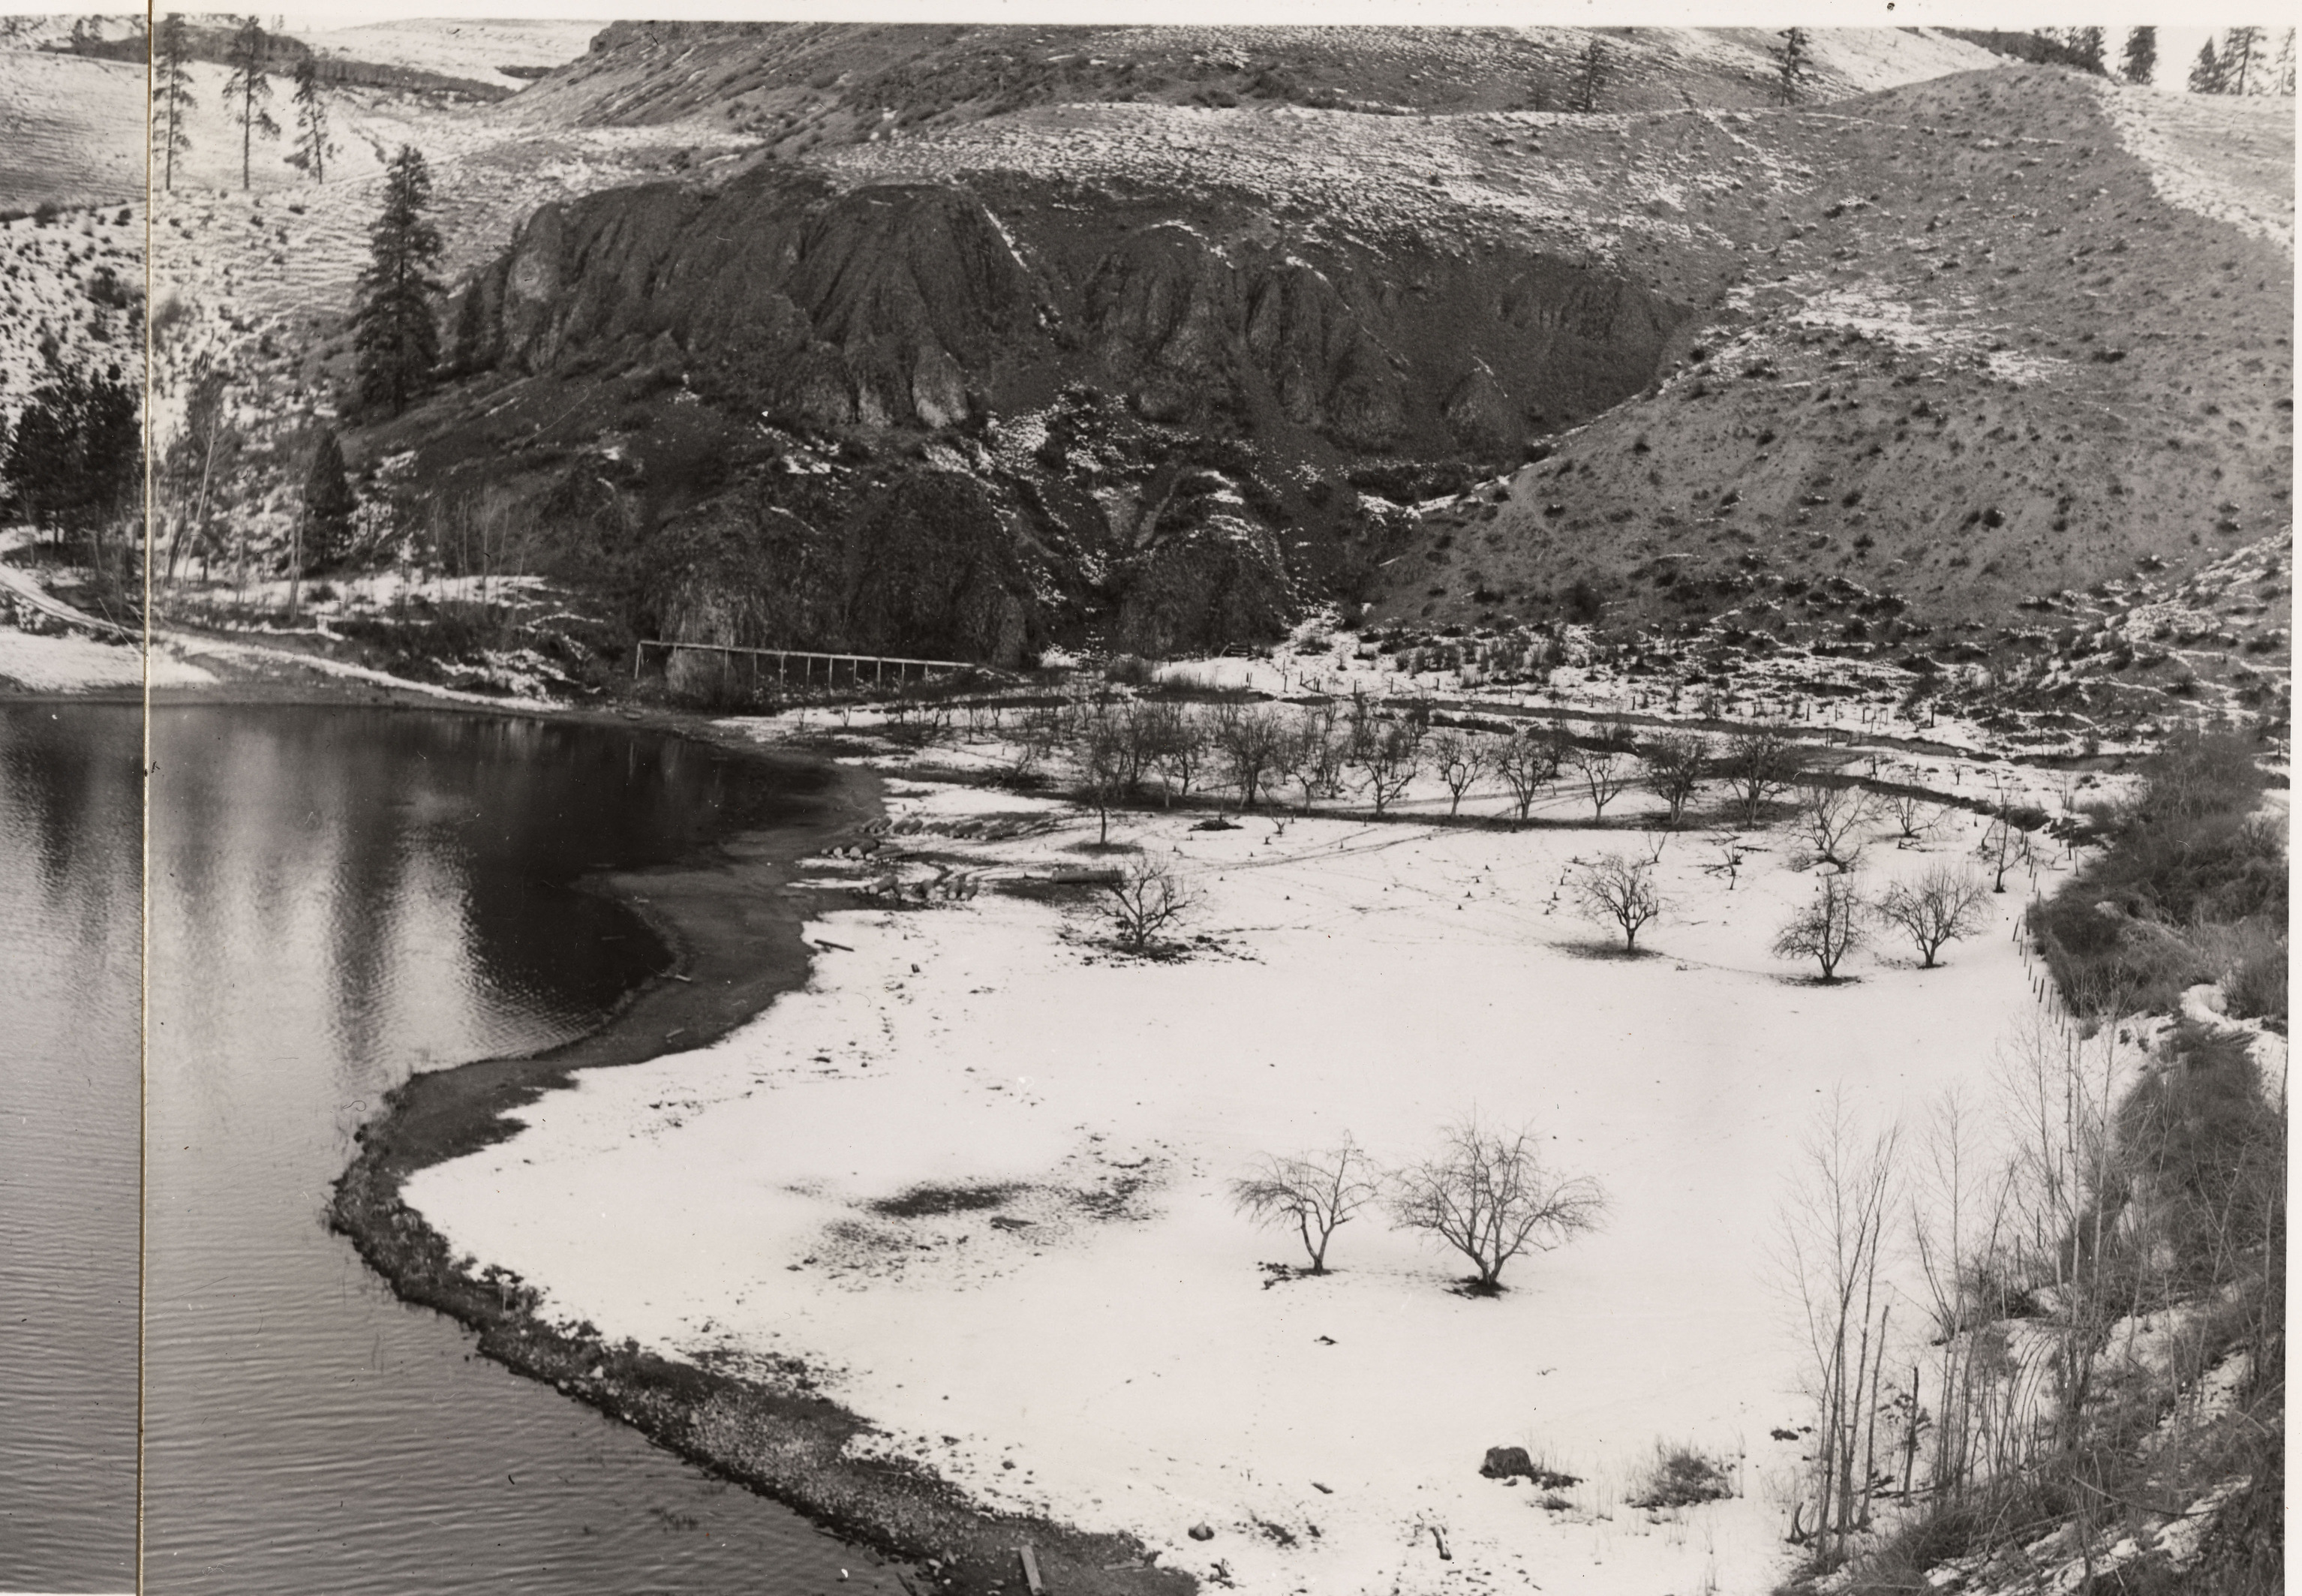 Black and white photograph of the snowy shoreline of a body of water with steep, dark cliffs in the background